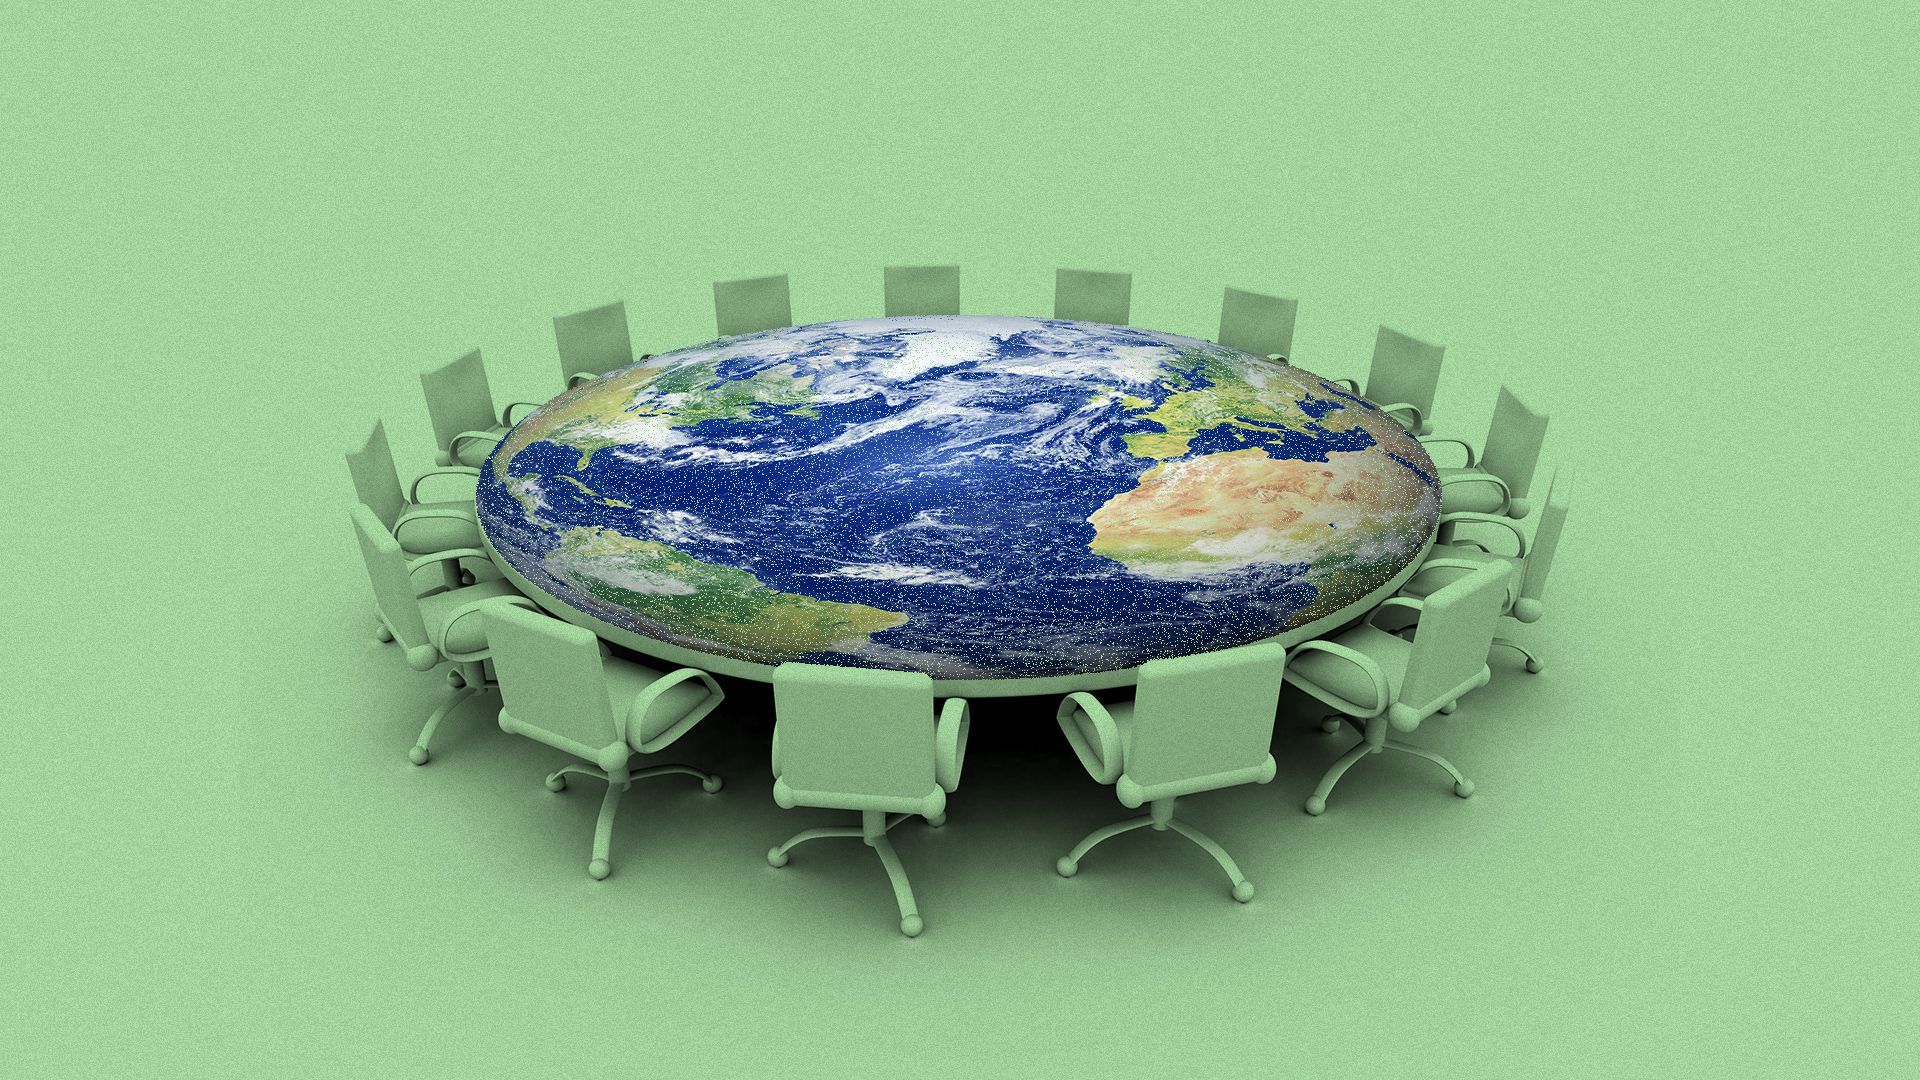 Illustration of green chairs around an Earth table.